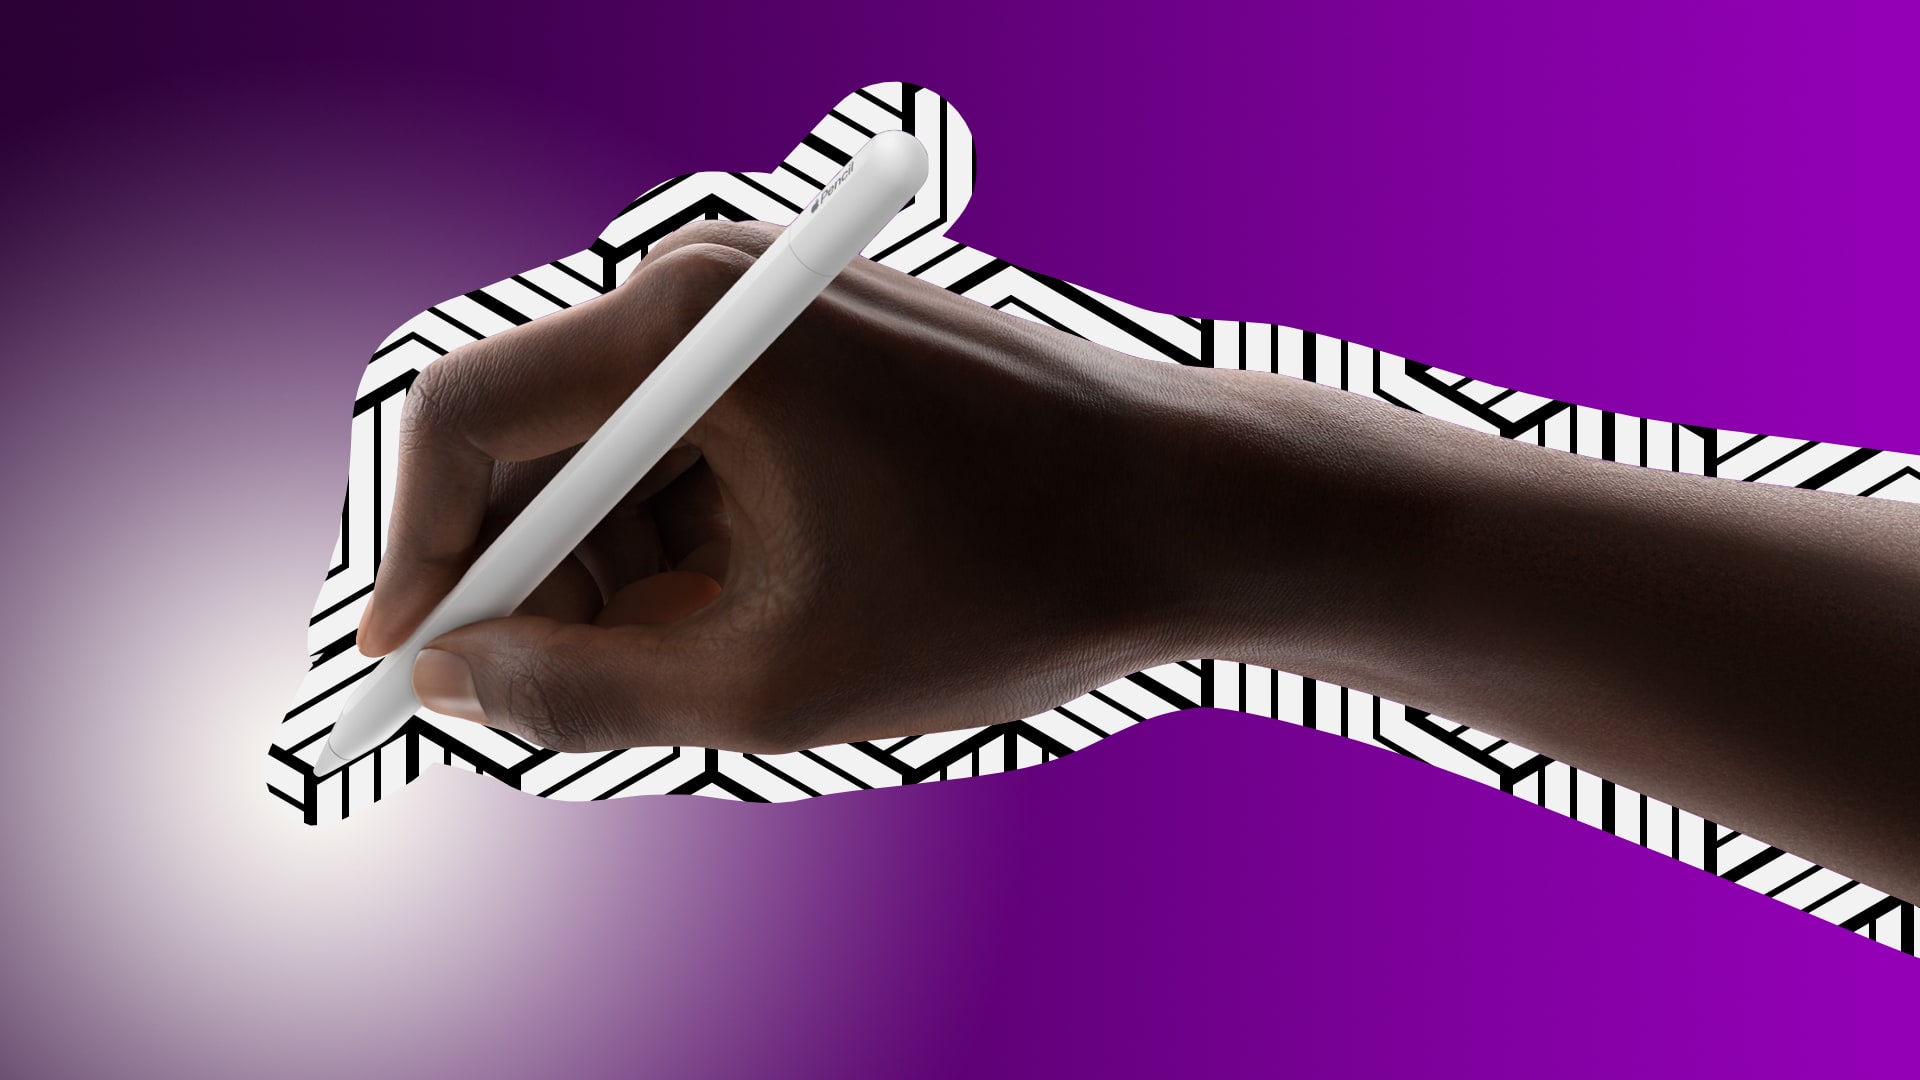 Male hand holding the USB-C Apple Pencil, set against a dark purple gradient background